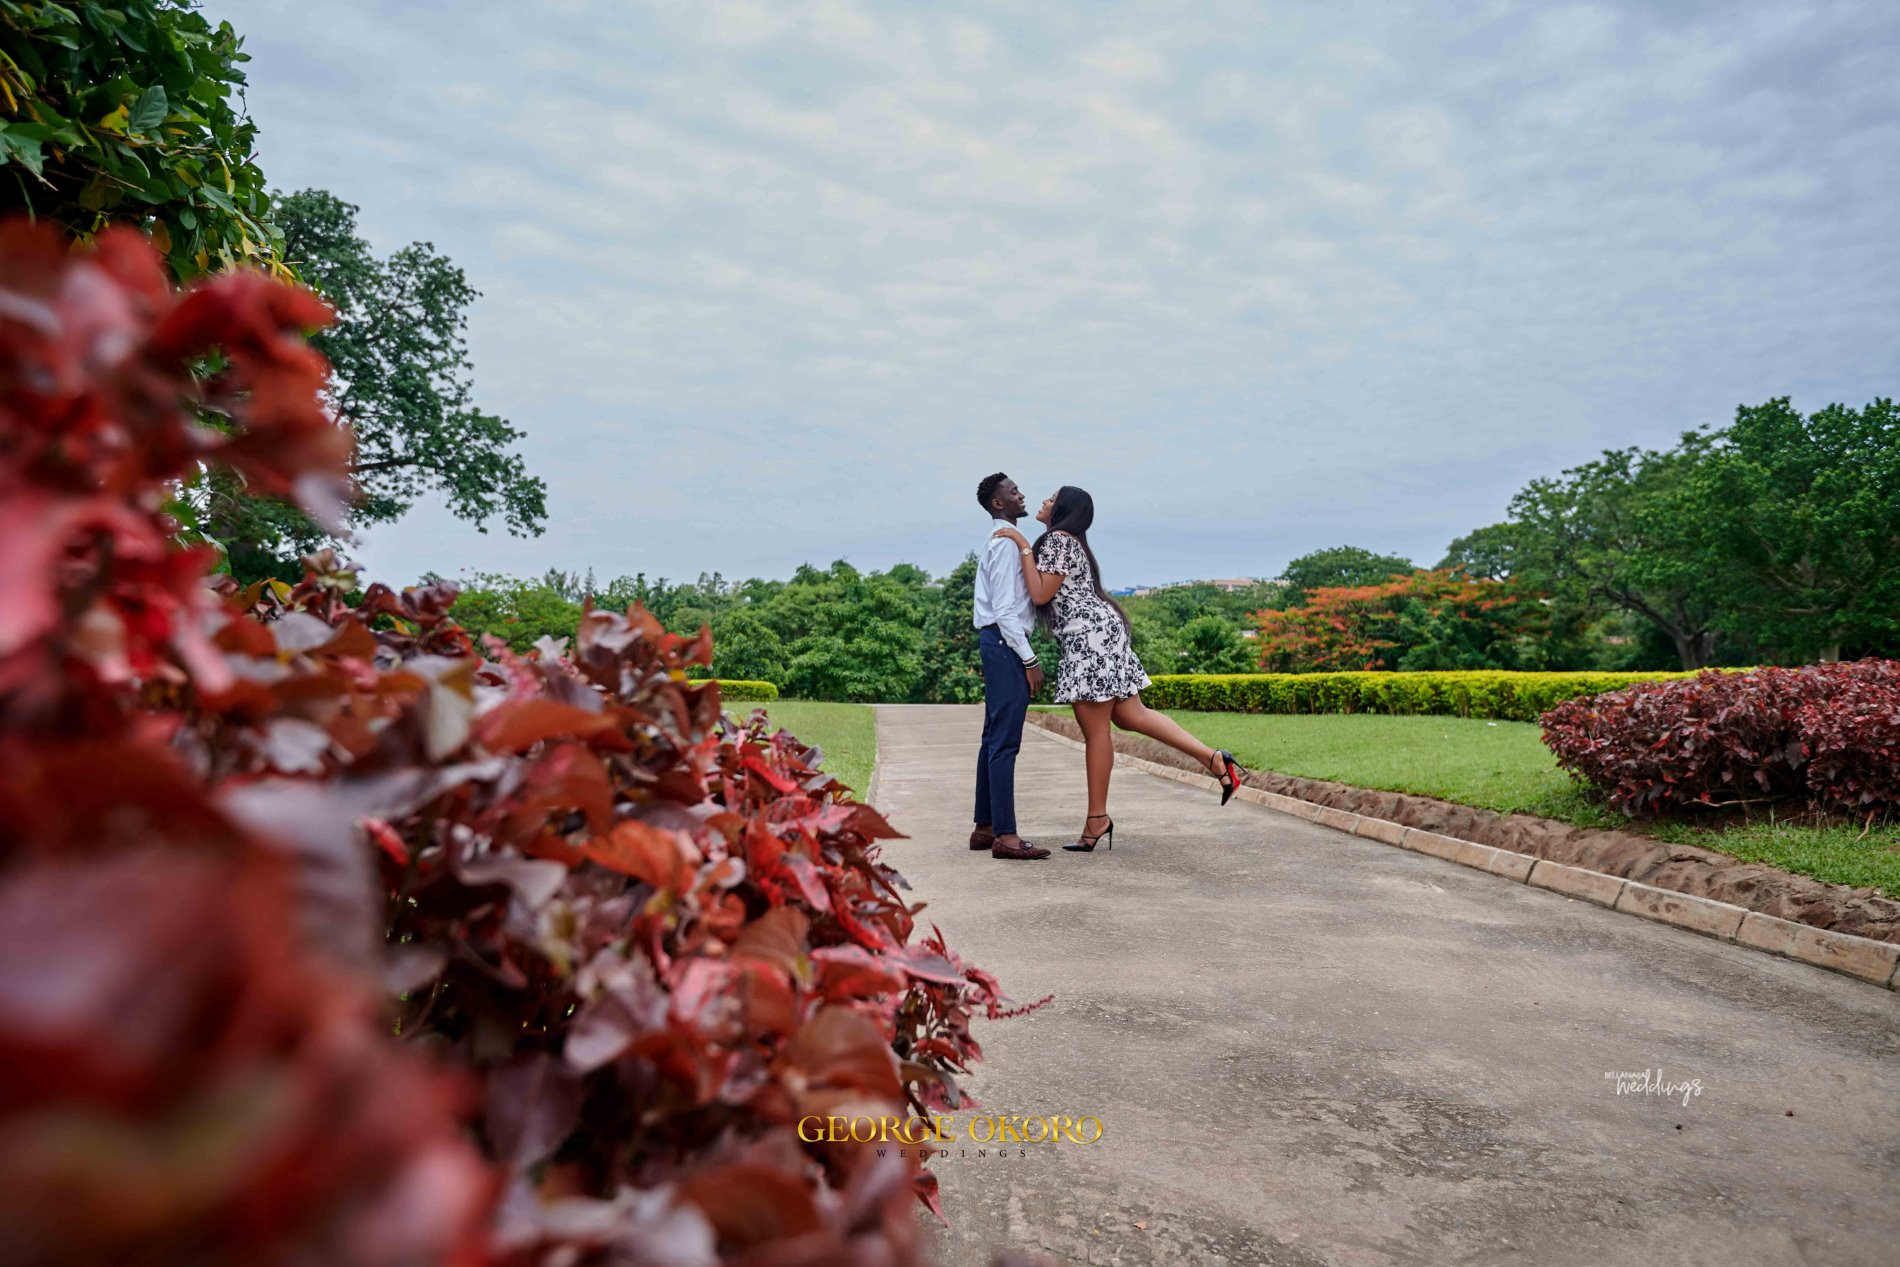 Check out stunning pre-wedding photos of Super Eagles star Wilfred Ndidi and his lover, Dinma